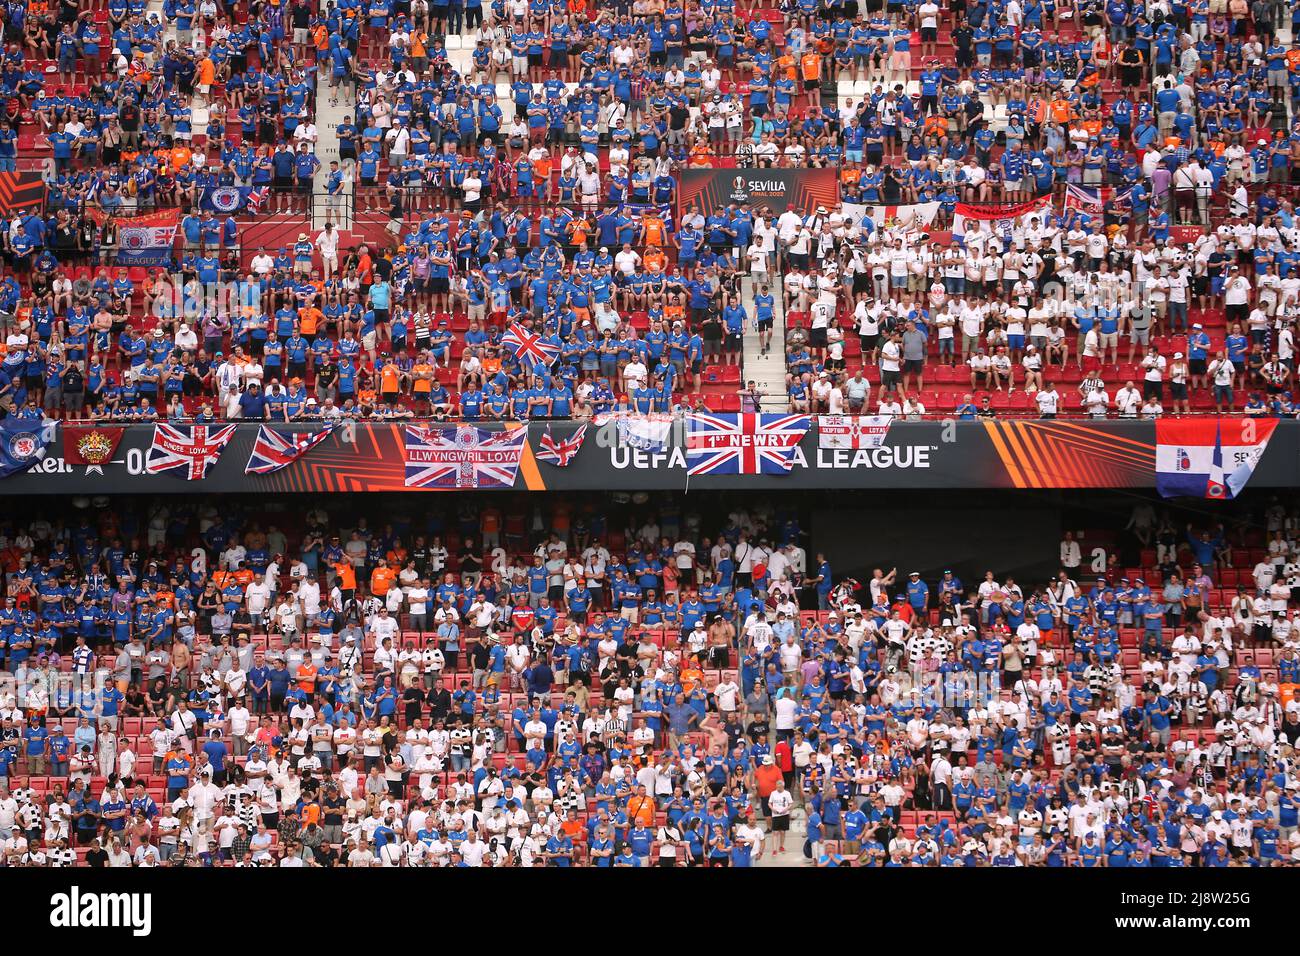 Rangers fans in the stands during the UEFA Europa League Final at the Estadio Ramon Sanchez-Pizjuan, Seville. Picture date: Wednesday May 18, 2022. Stock Photo